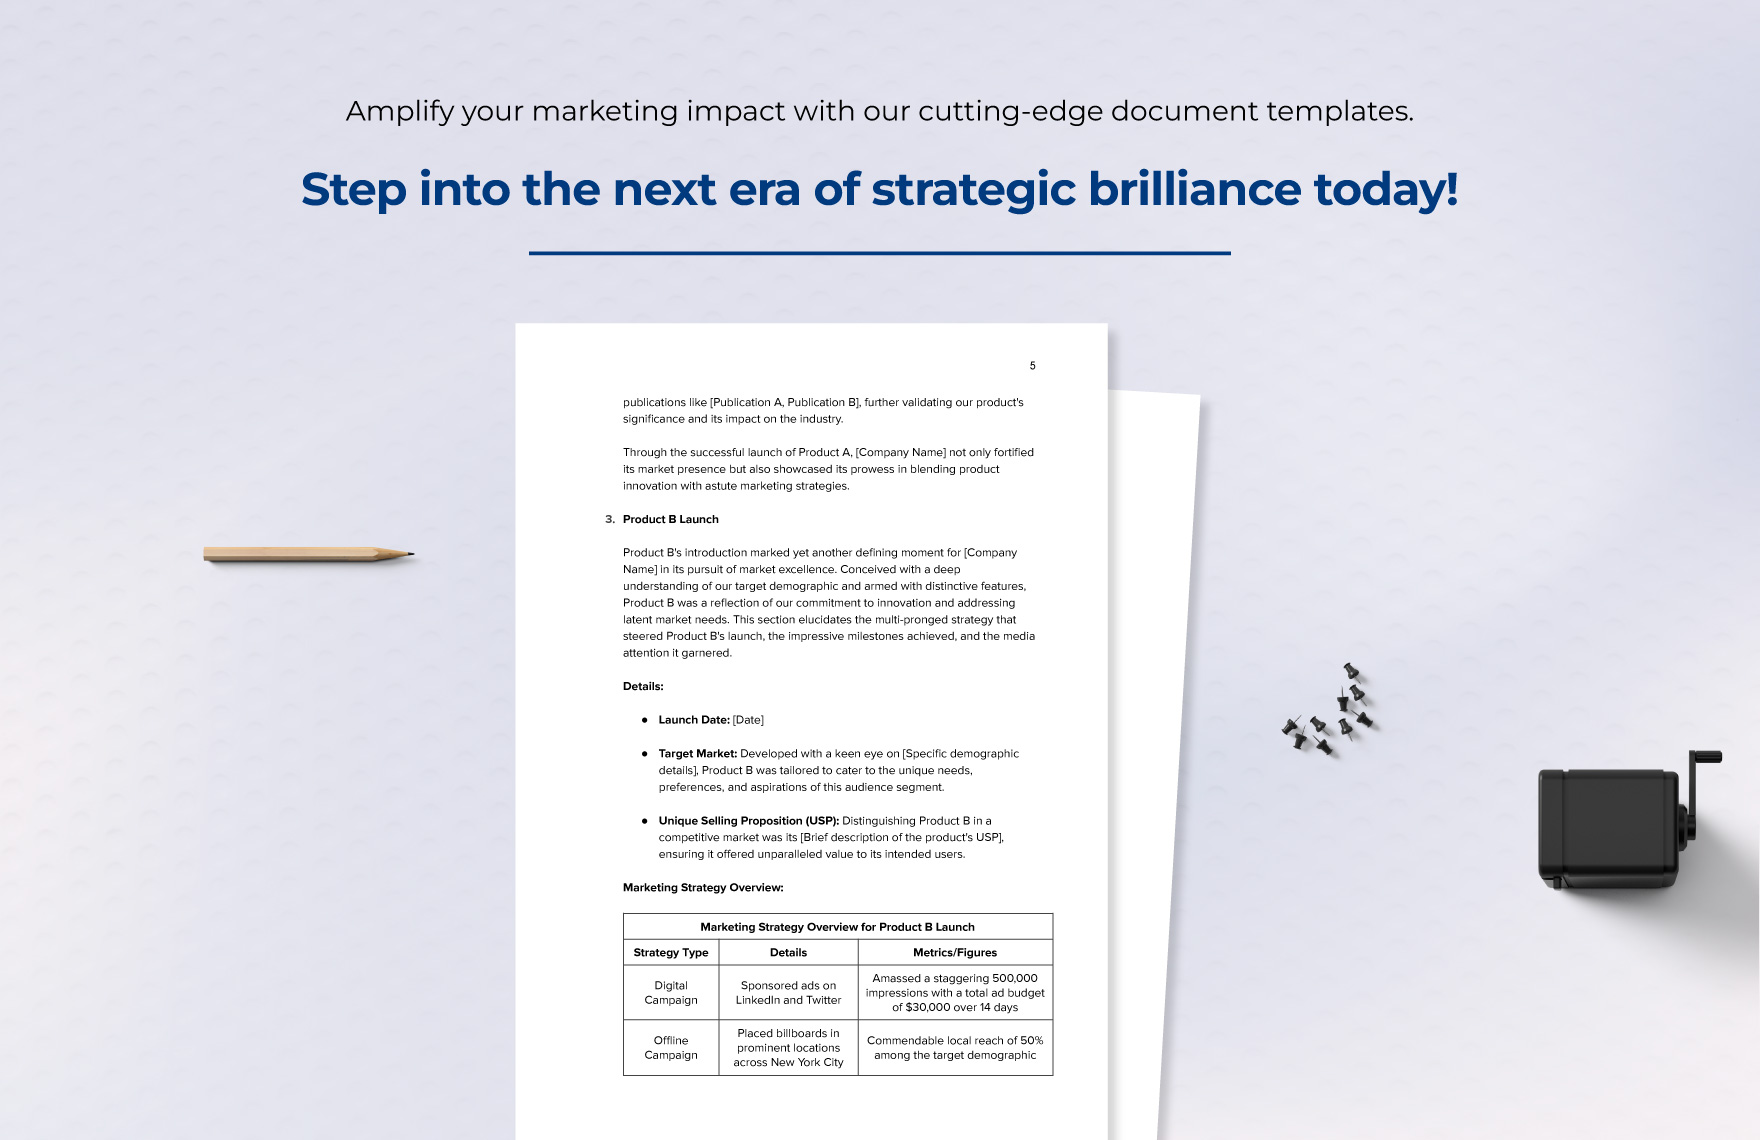 Marketing Portfolio of Previous Successful Product Launches Template